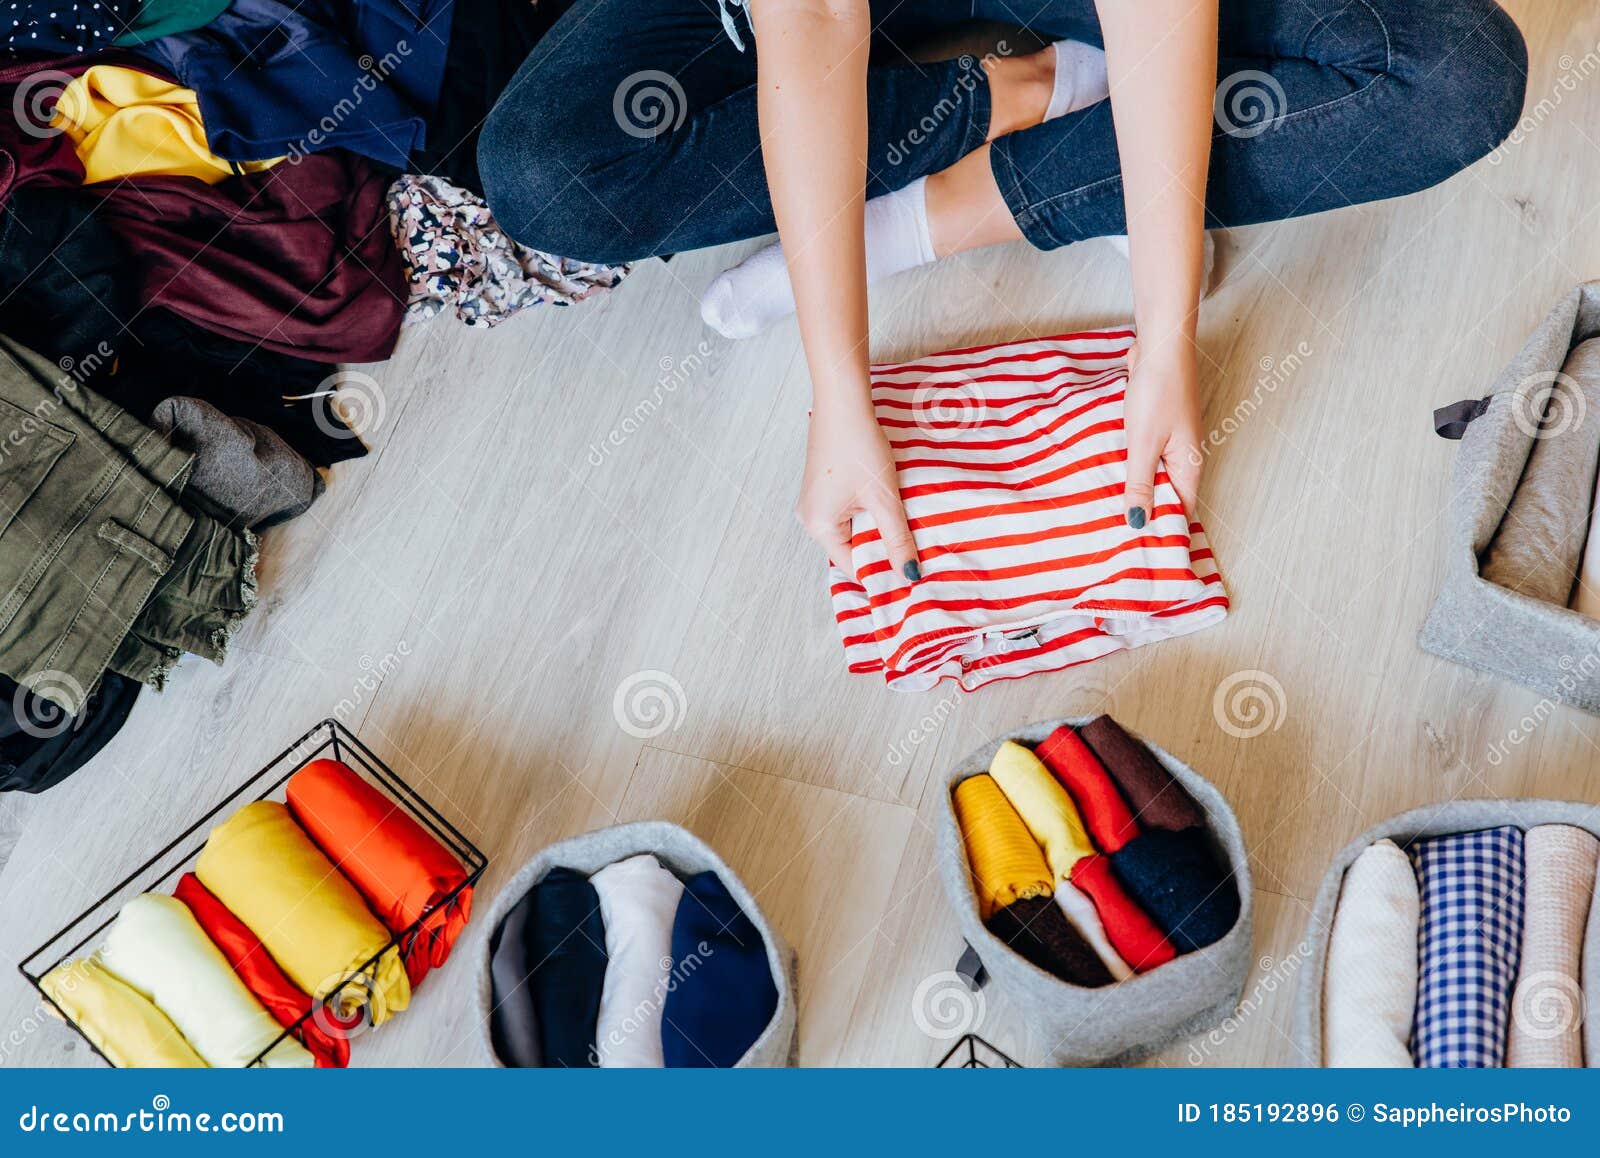 woman folding pile of clothes on the floor, organizing stuff